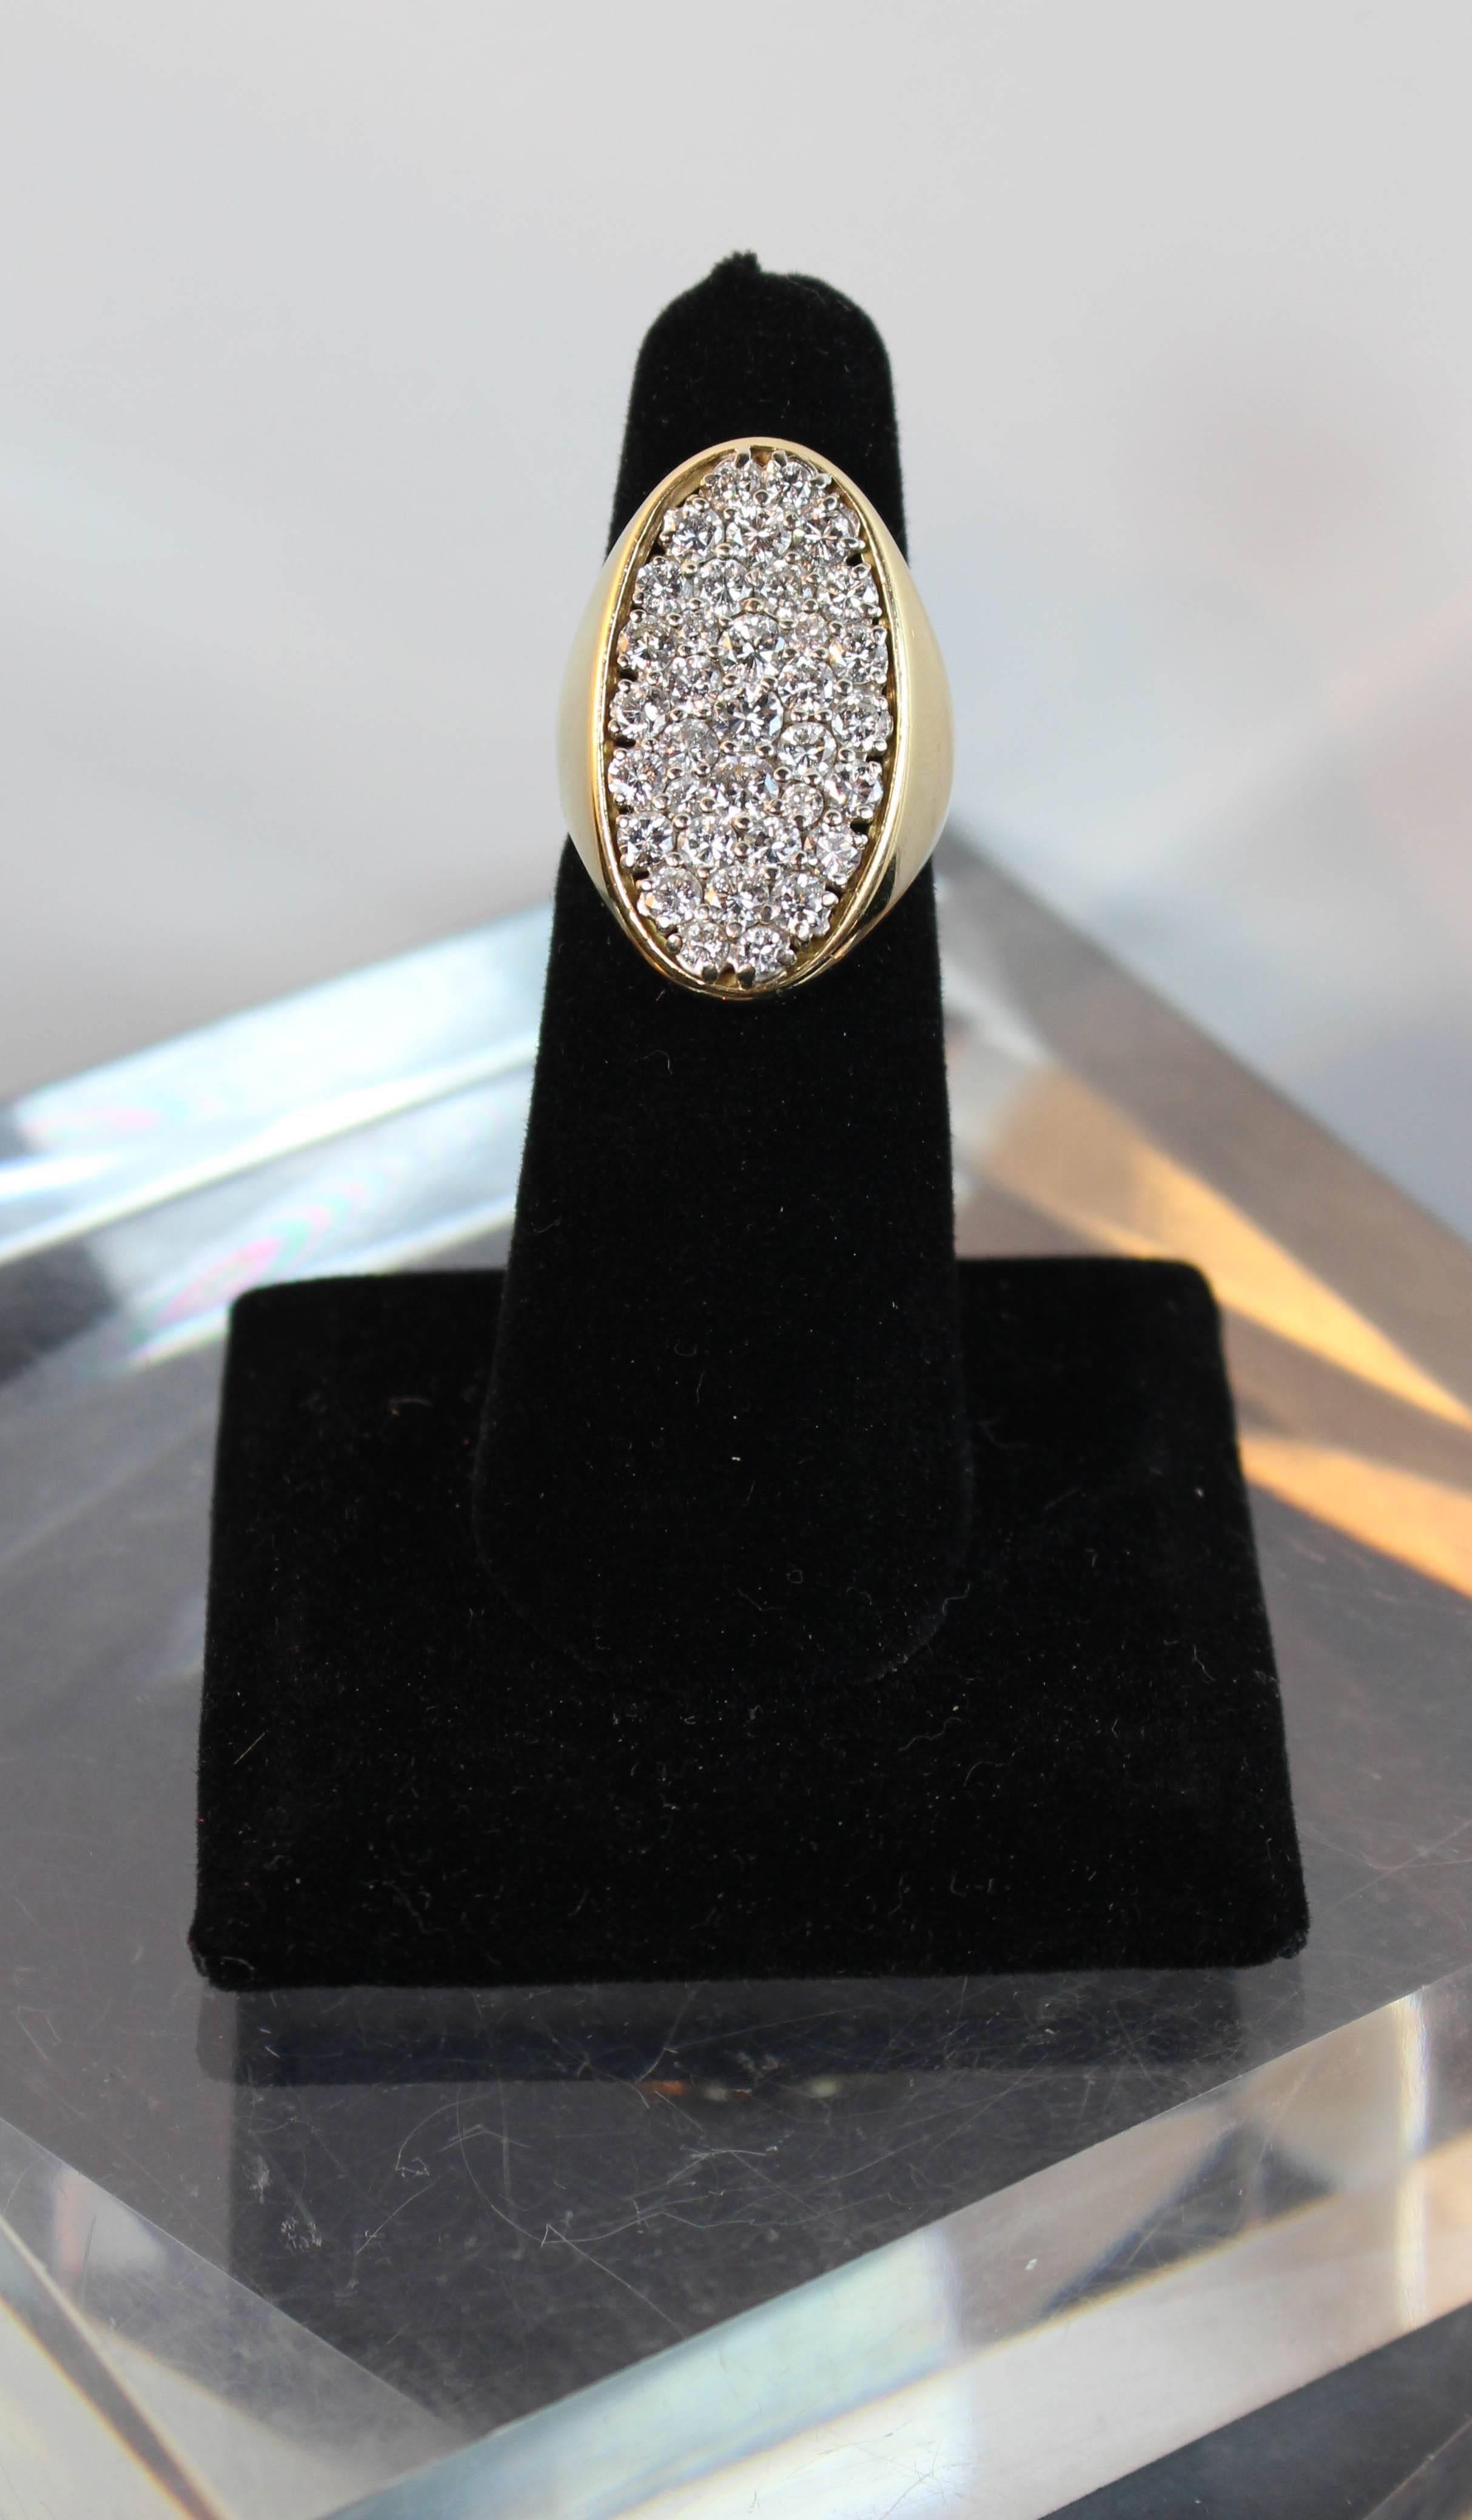 This ring is composed of 18kt yellow gold and features a stunning array of pave diamonds, set in an oval shaped design. Italian 1970s. Size 6. In excellent condition.

Please feel free to ask any questions you may have, we are happy to assist.